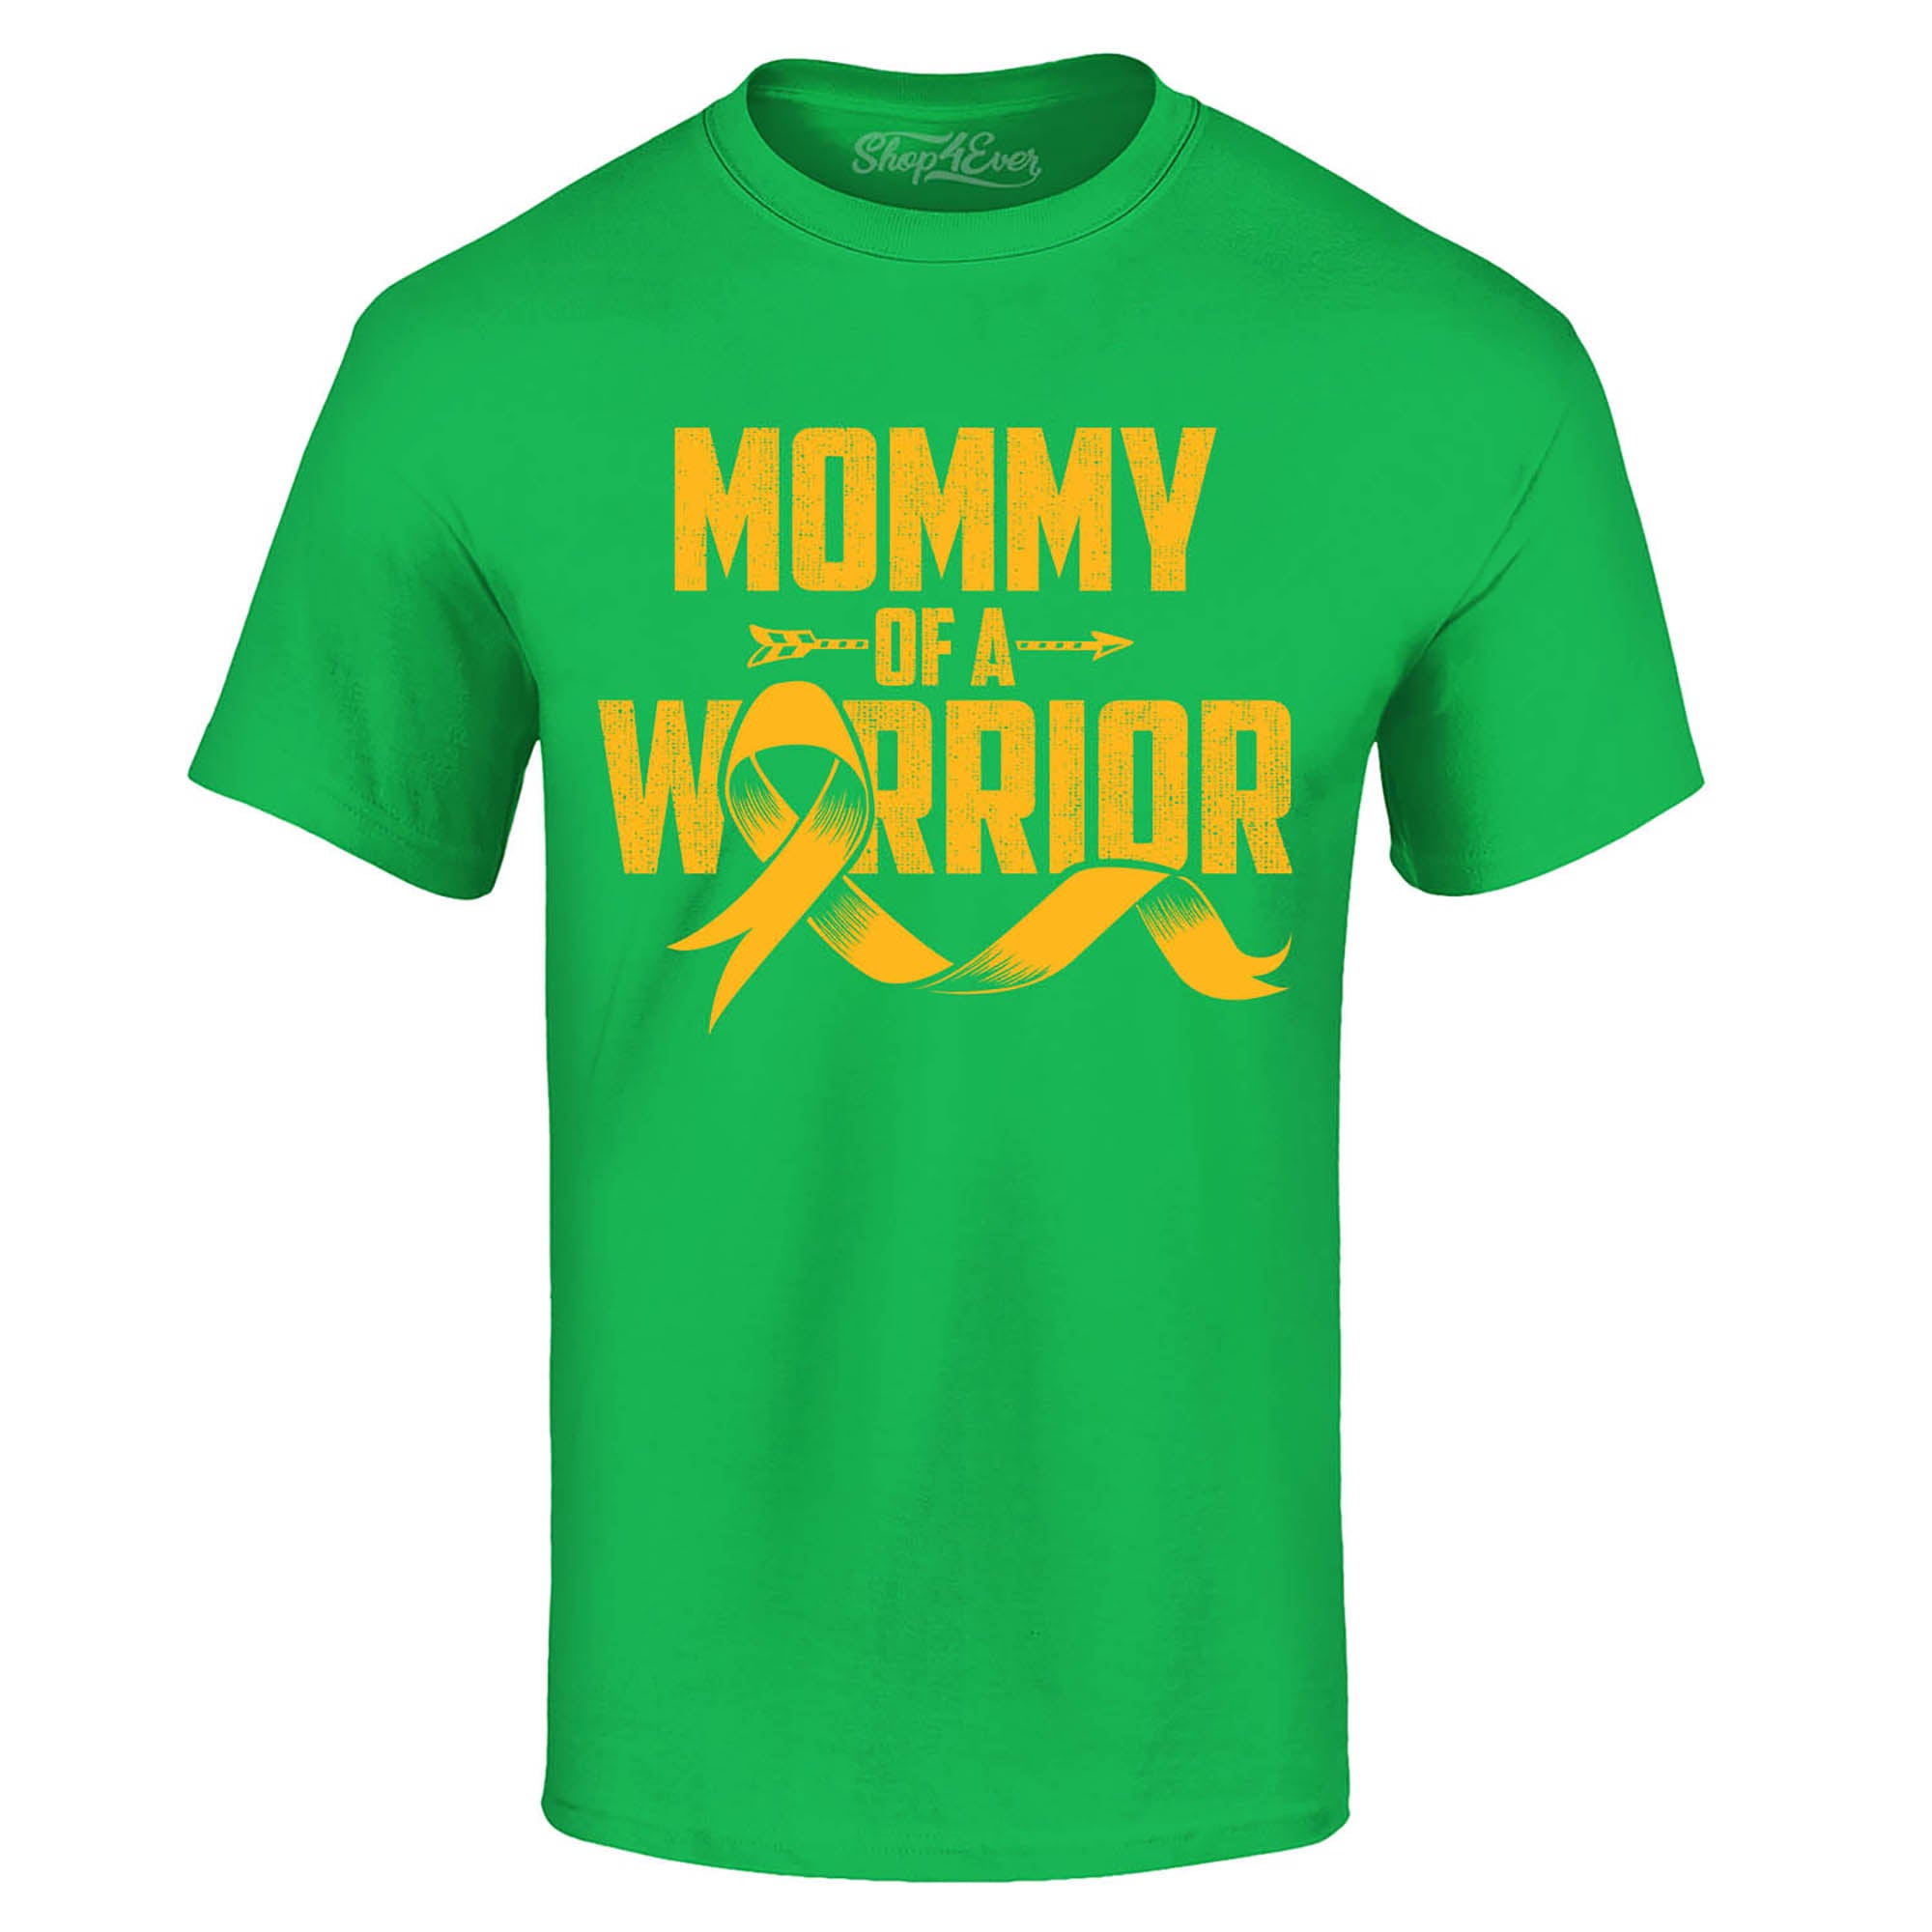 Mommy of a Warrior Childhood Cancer Awareness T-Shirt